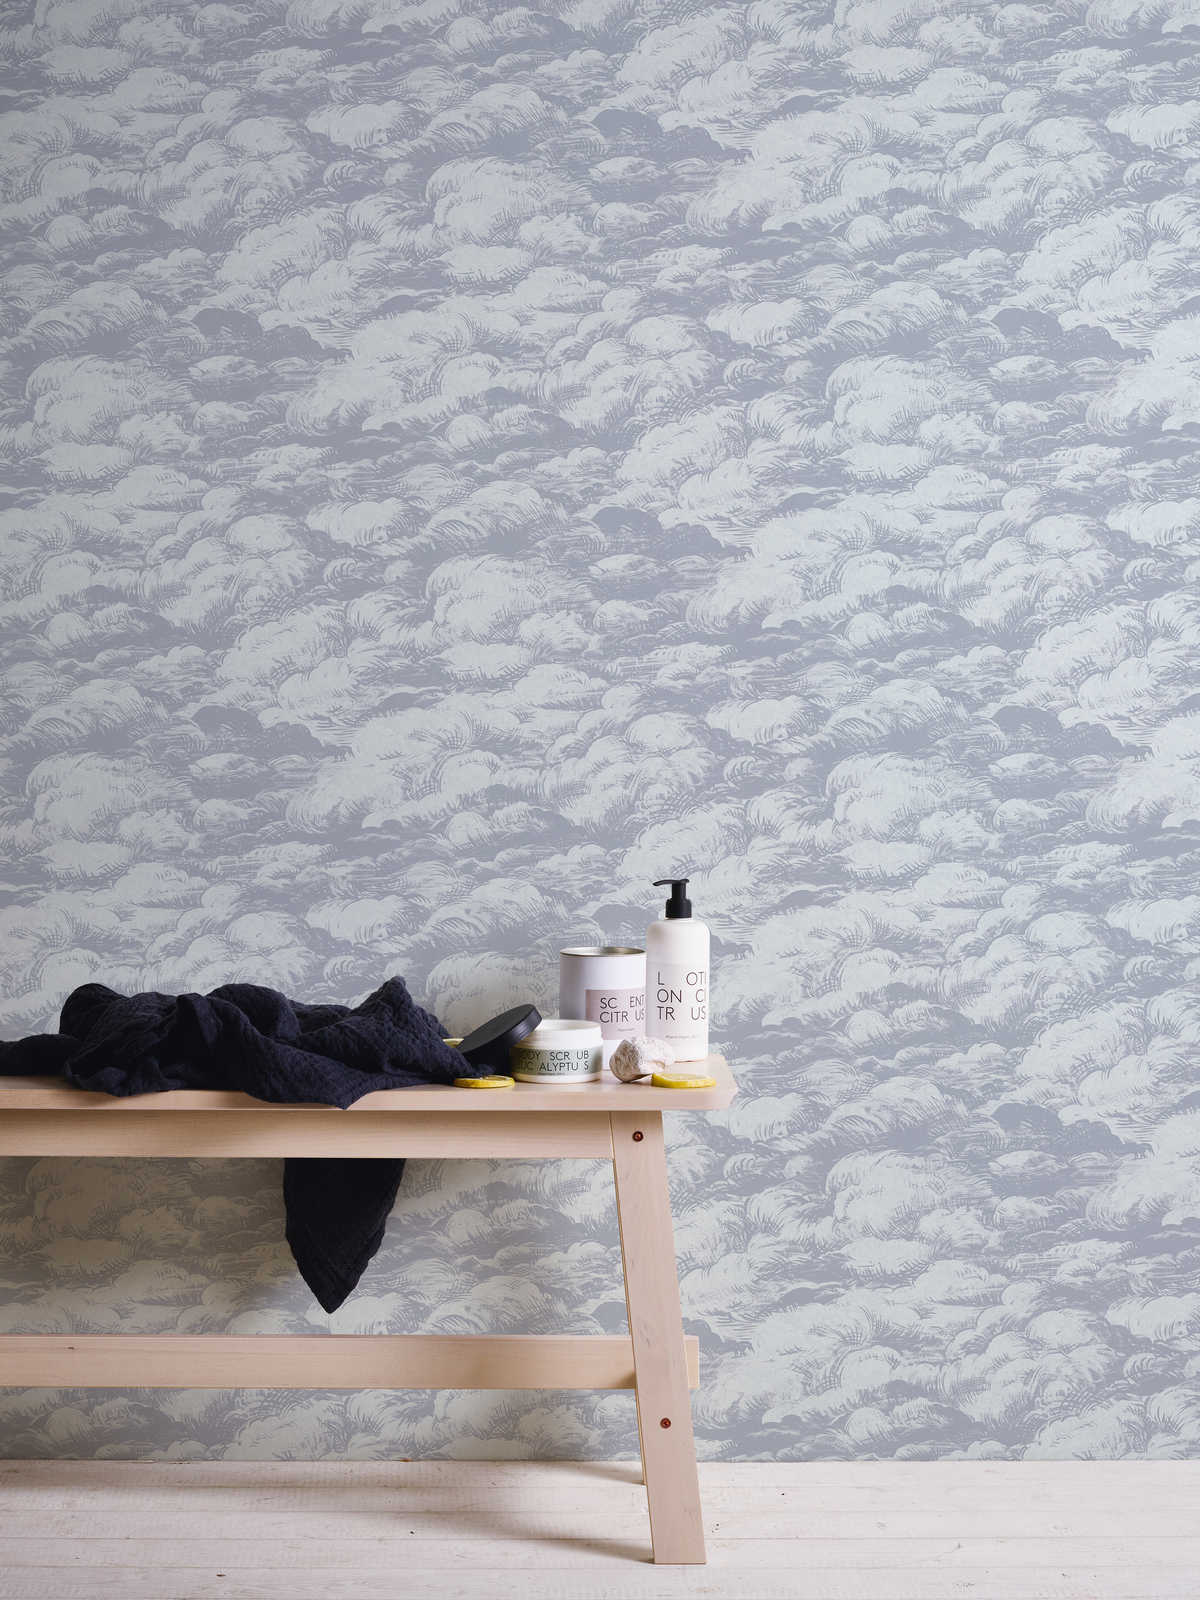             wallpaper grey with nature pattern in vintage style - grey, white
        